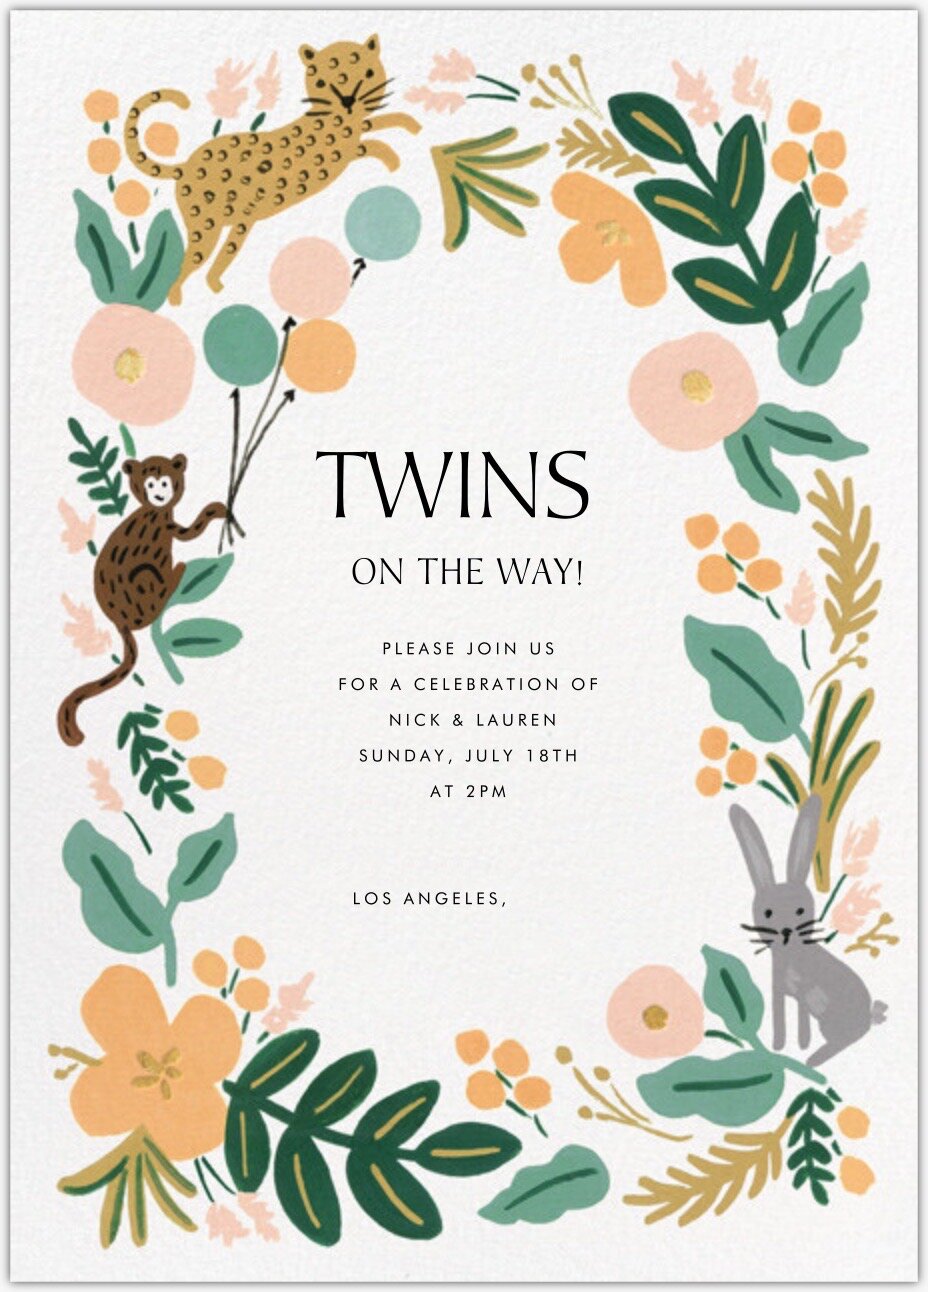 paperless post, "Land Before Twins" Jungle Baby Shower Theme, twin baby shower theme, baby shower inspo, safari, wildlife, baby shower ideas, personal details, lments of style, la blogger, nothgin fits but kiko dress in ichika print